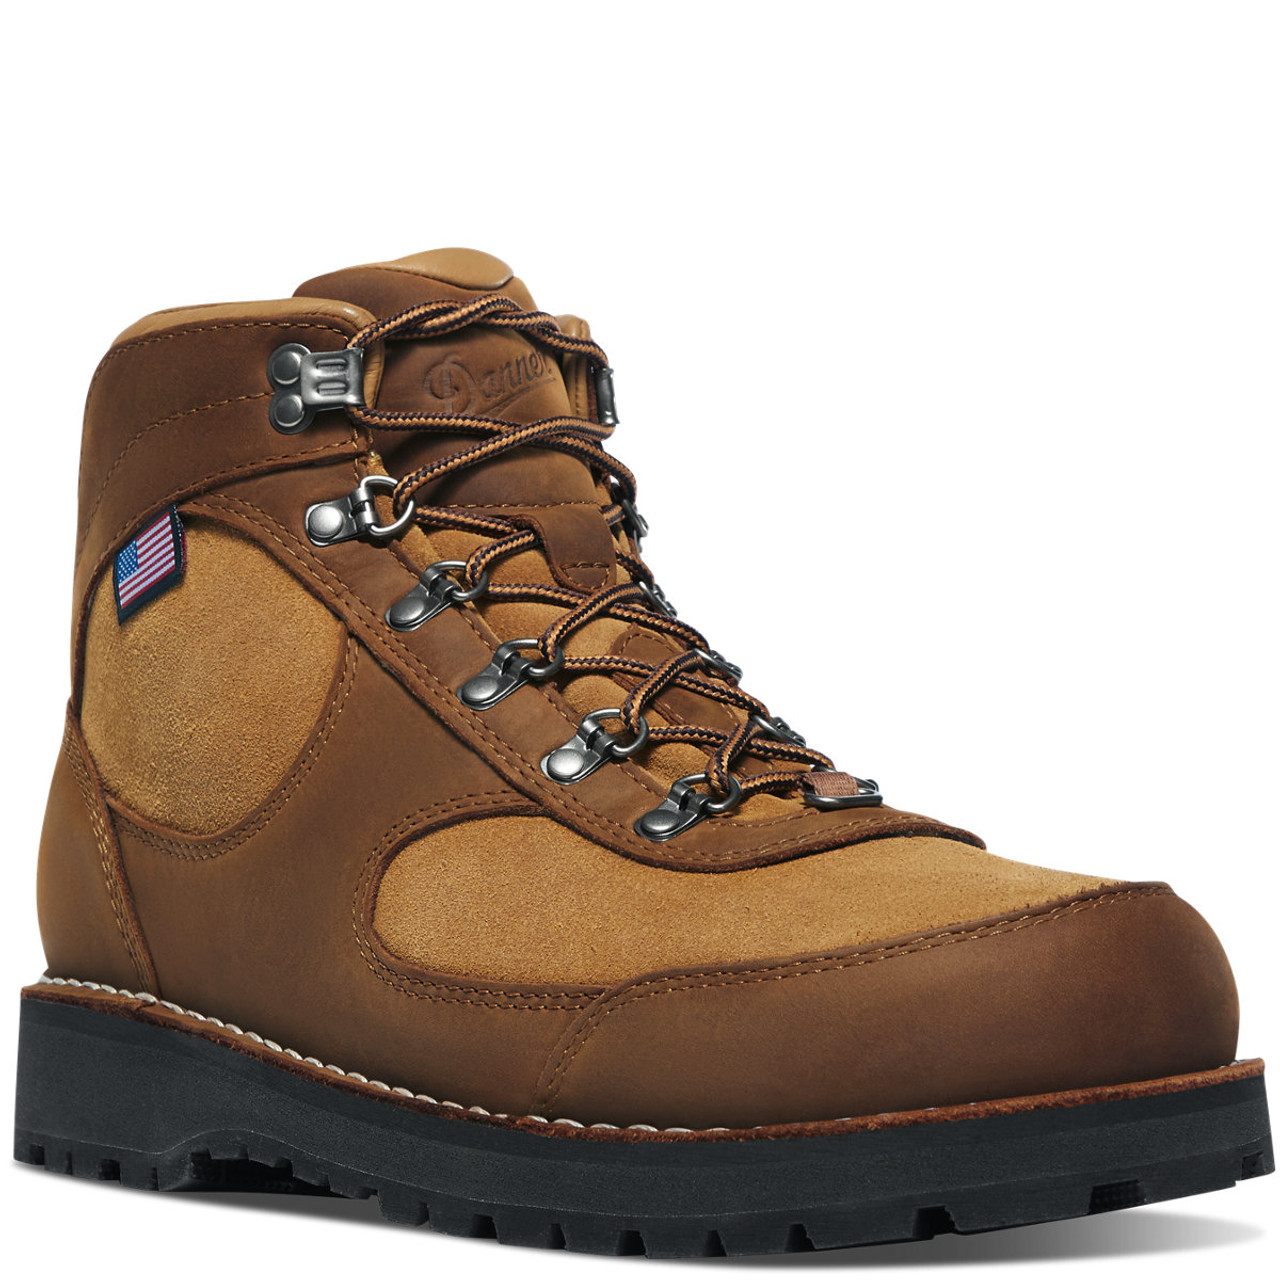 DANNER® CASCADE CREST MEN'S  GRIZZLY BROWN/RHODO RED HIKE BOOTS 60430